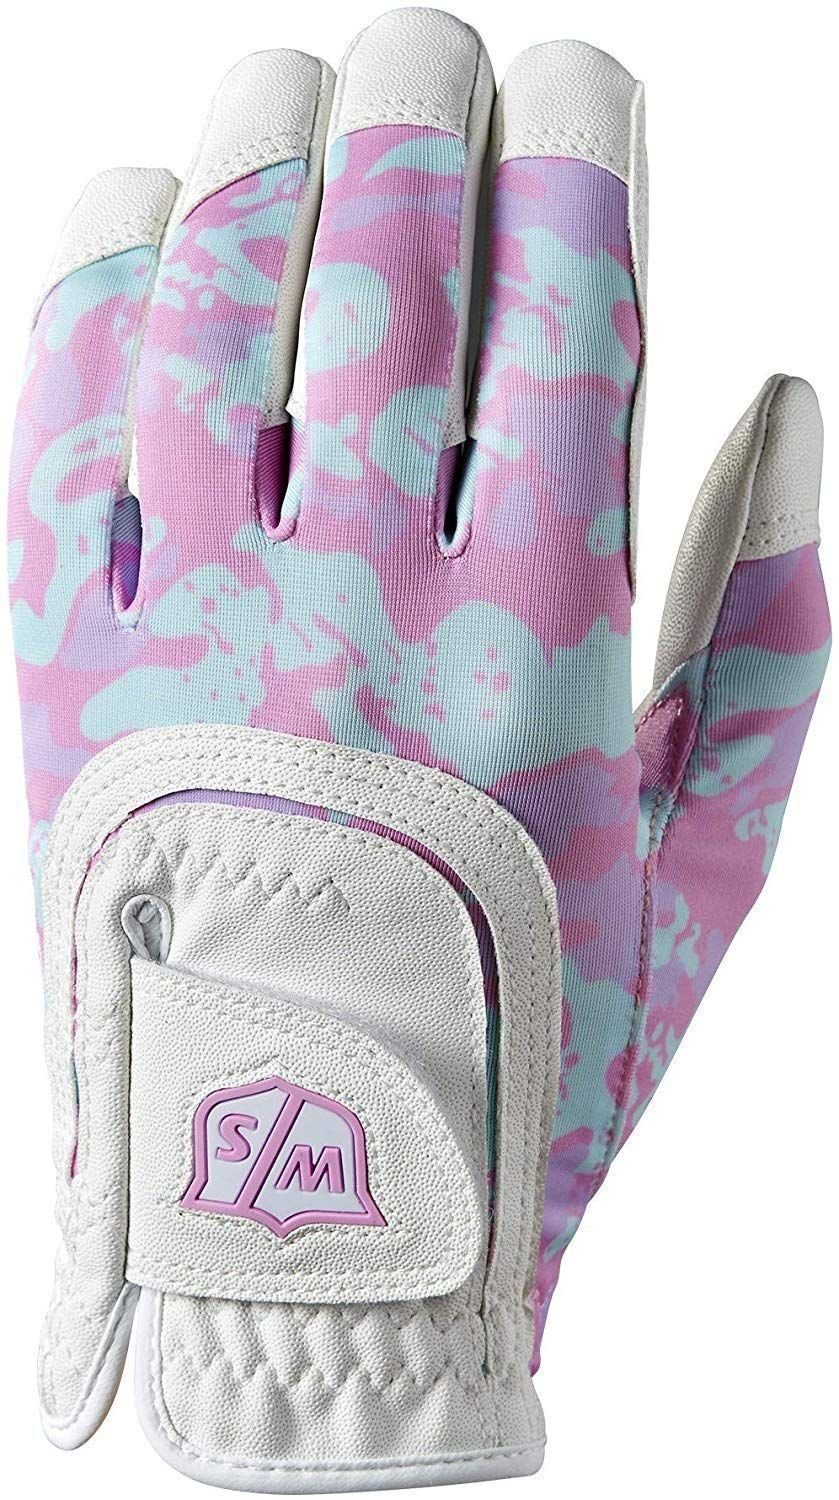 Gloves Wilson Staff Fit-All Junior Golf Glove White/Pink Camo Left Hand for Right Handed Golfers